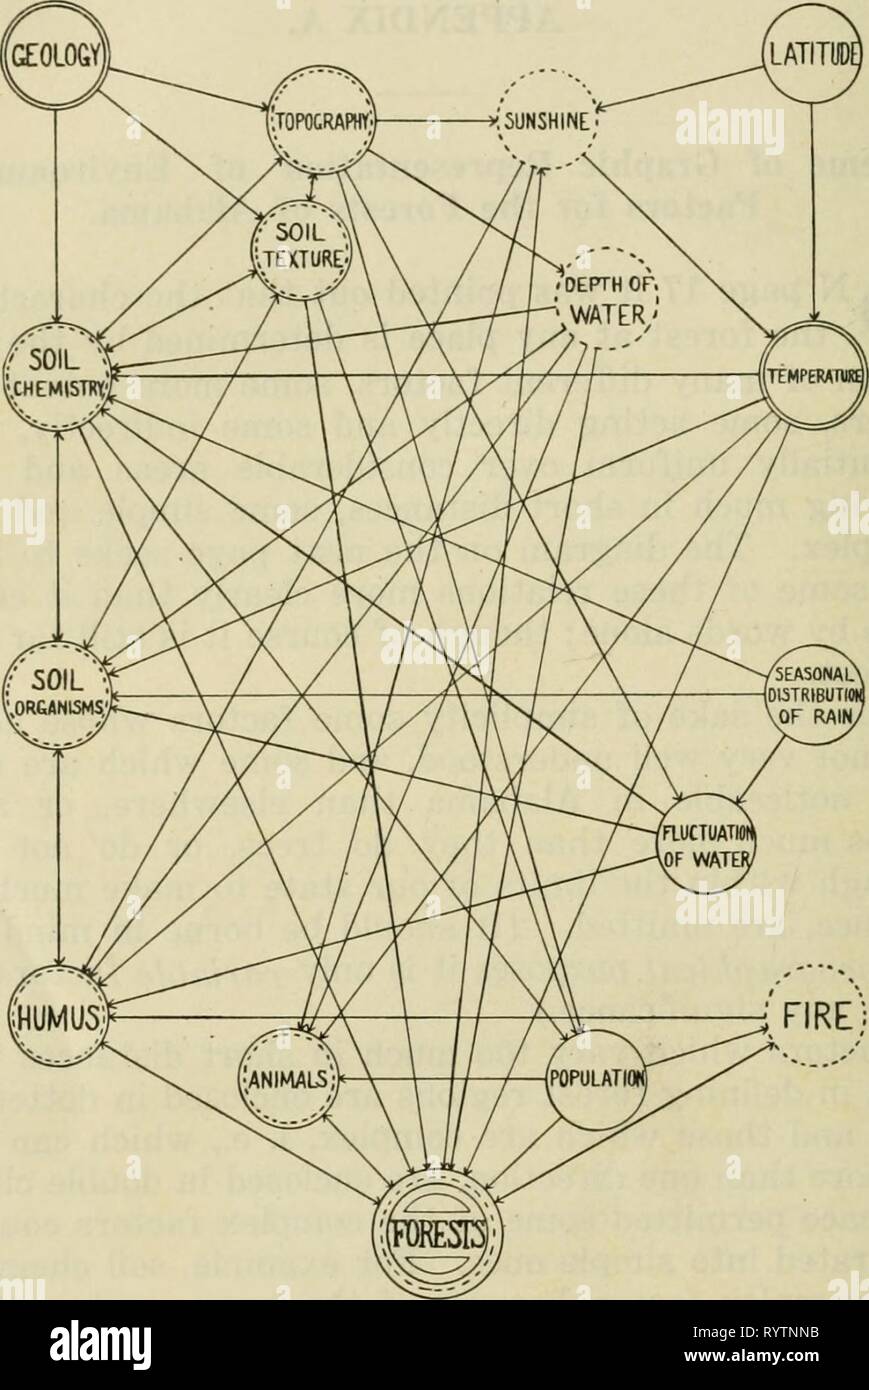 Economic botany of Alabama (1913-1928) Economic botany of Alabama . economicbotanyof12harp Year: 1913-1928.  186 ECONOMIC BOTANY OF ALABAMA. ENVfRONMENTTAL FACTORS FOR ALABAMA FORESTS    R.M.H 1313 Diagram showing relations of the most important environmental factors in Alabama to the forests and to each other. 'Soil organisms' means all plants and animals, from bacteria and fungi to moles and salamanders, which live underground or in humus and have some influence on the soil. 'Animals' means those which travel above ground and carry seeds or pollen, or feed on plants. 'Population' refers prim Stock Photo